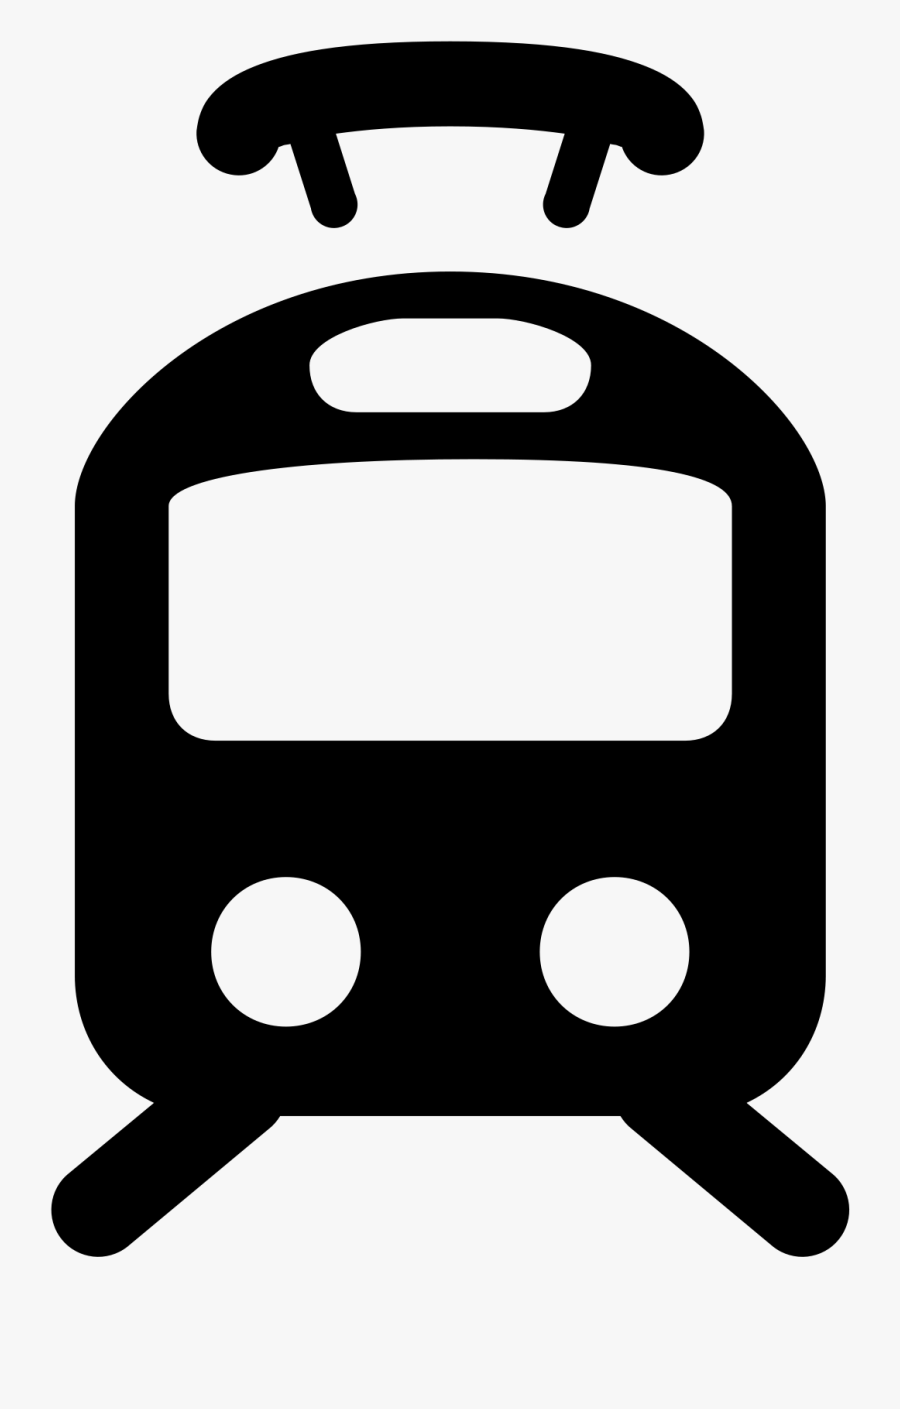 Tram Png - Tram Icon Png, Transparent Clipart